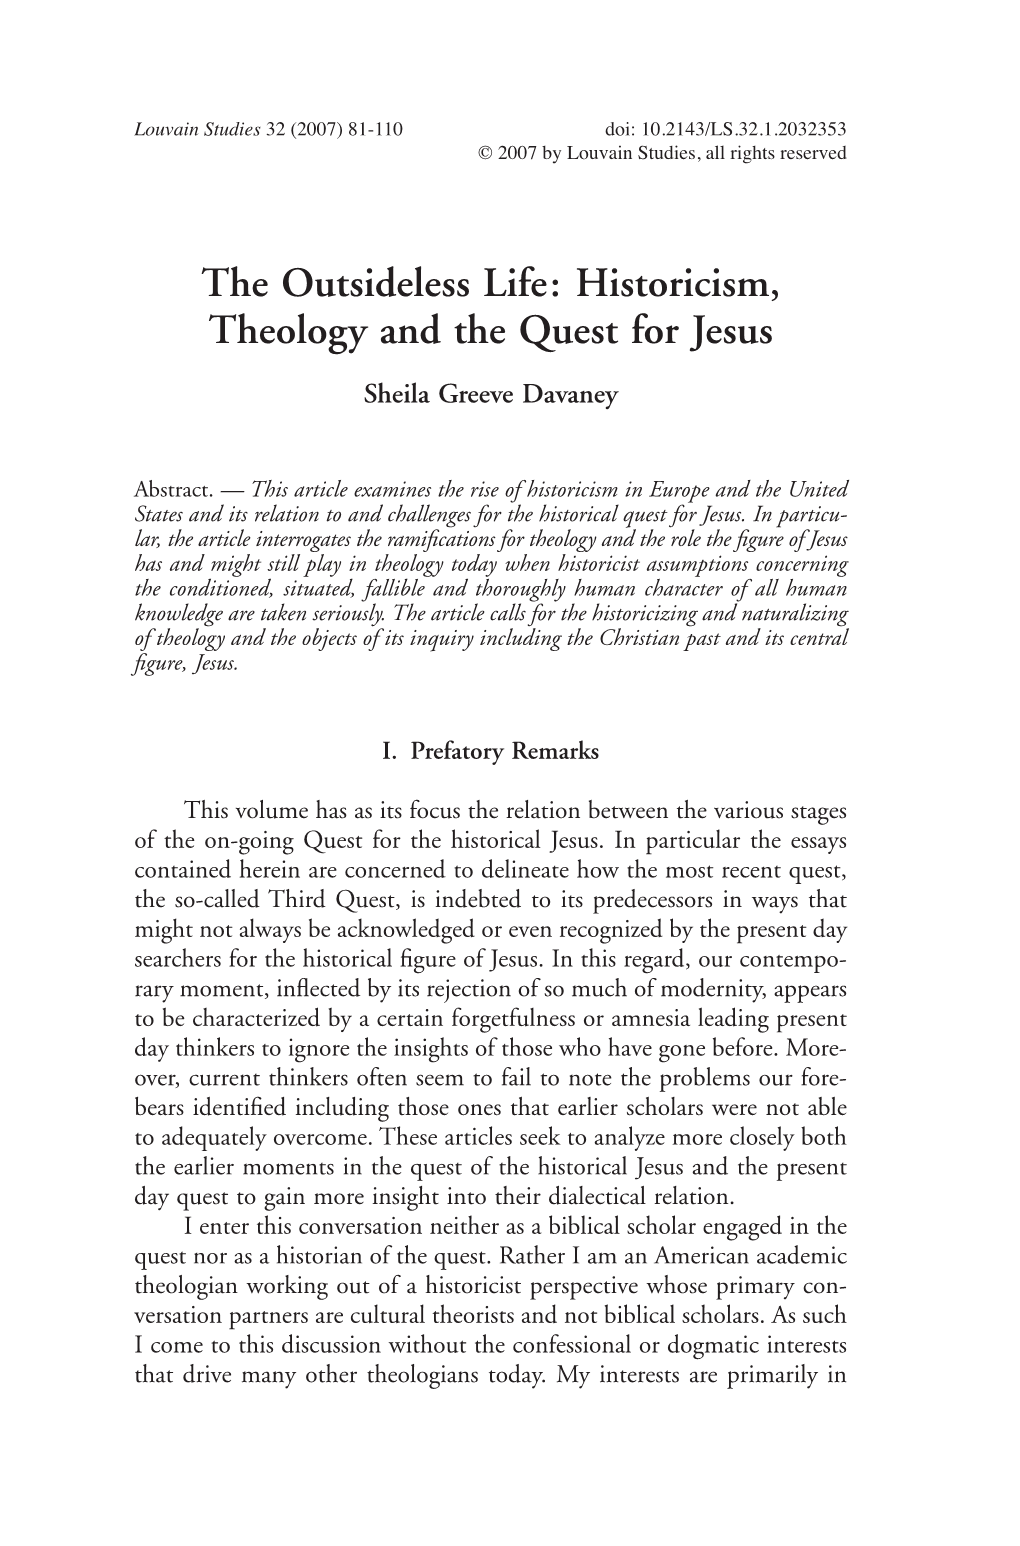 Historicism, Theology and the Quest for Jesus Sheila Greeve Davaney